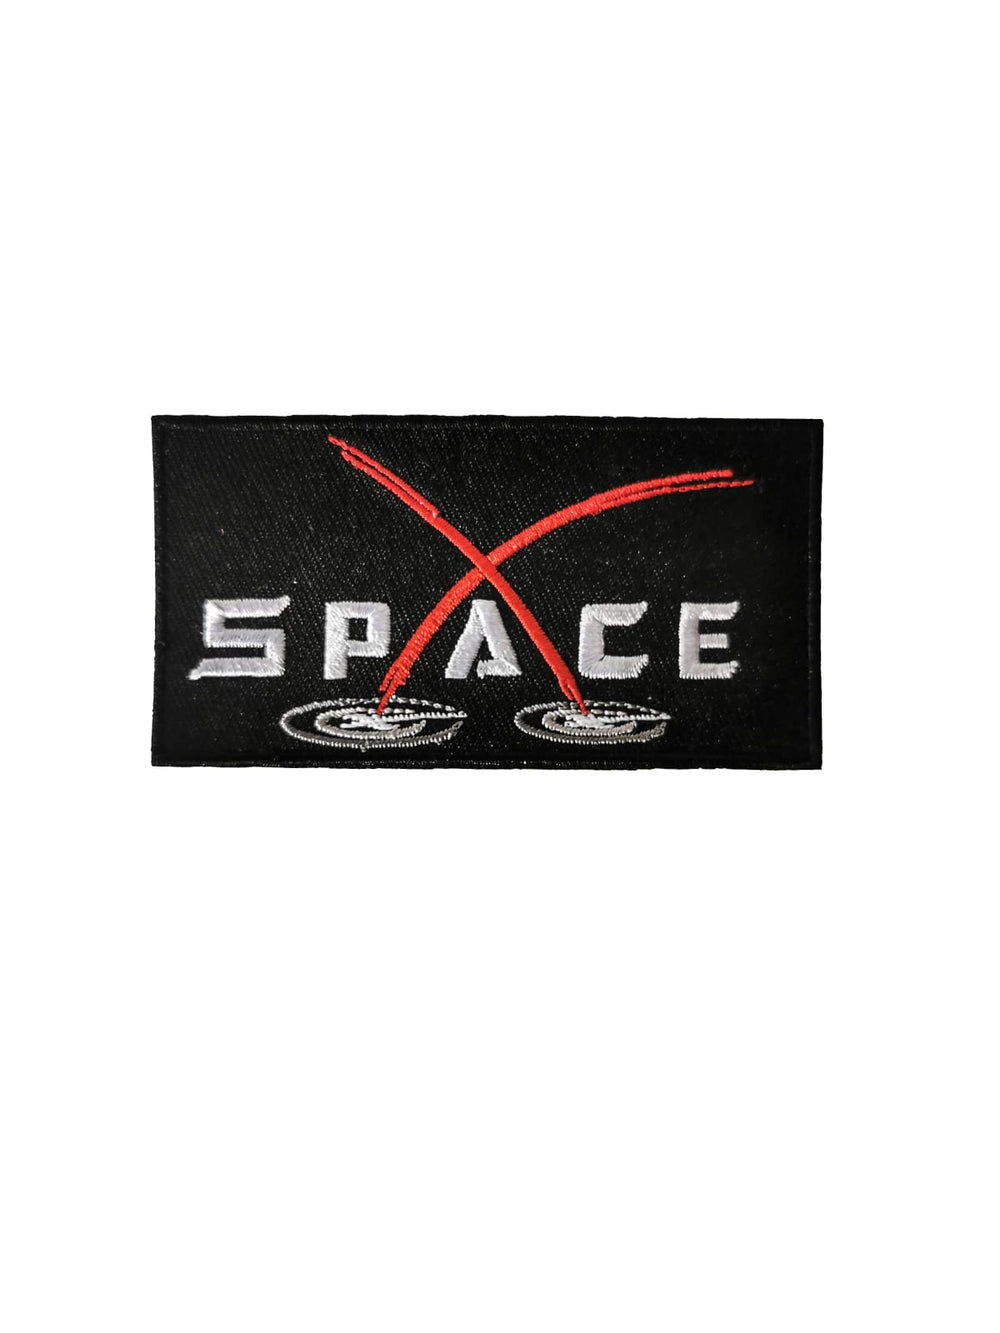 Space Patch - SpaceX Fanstore